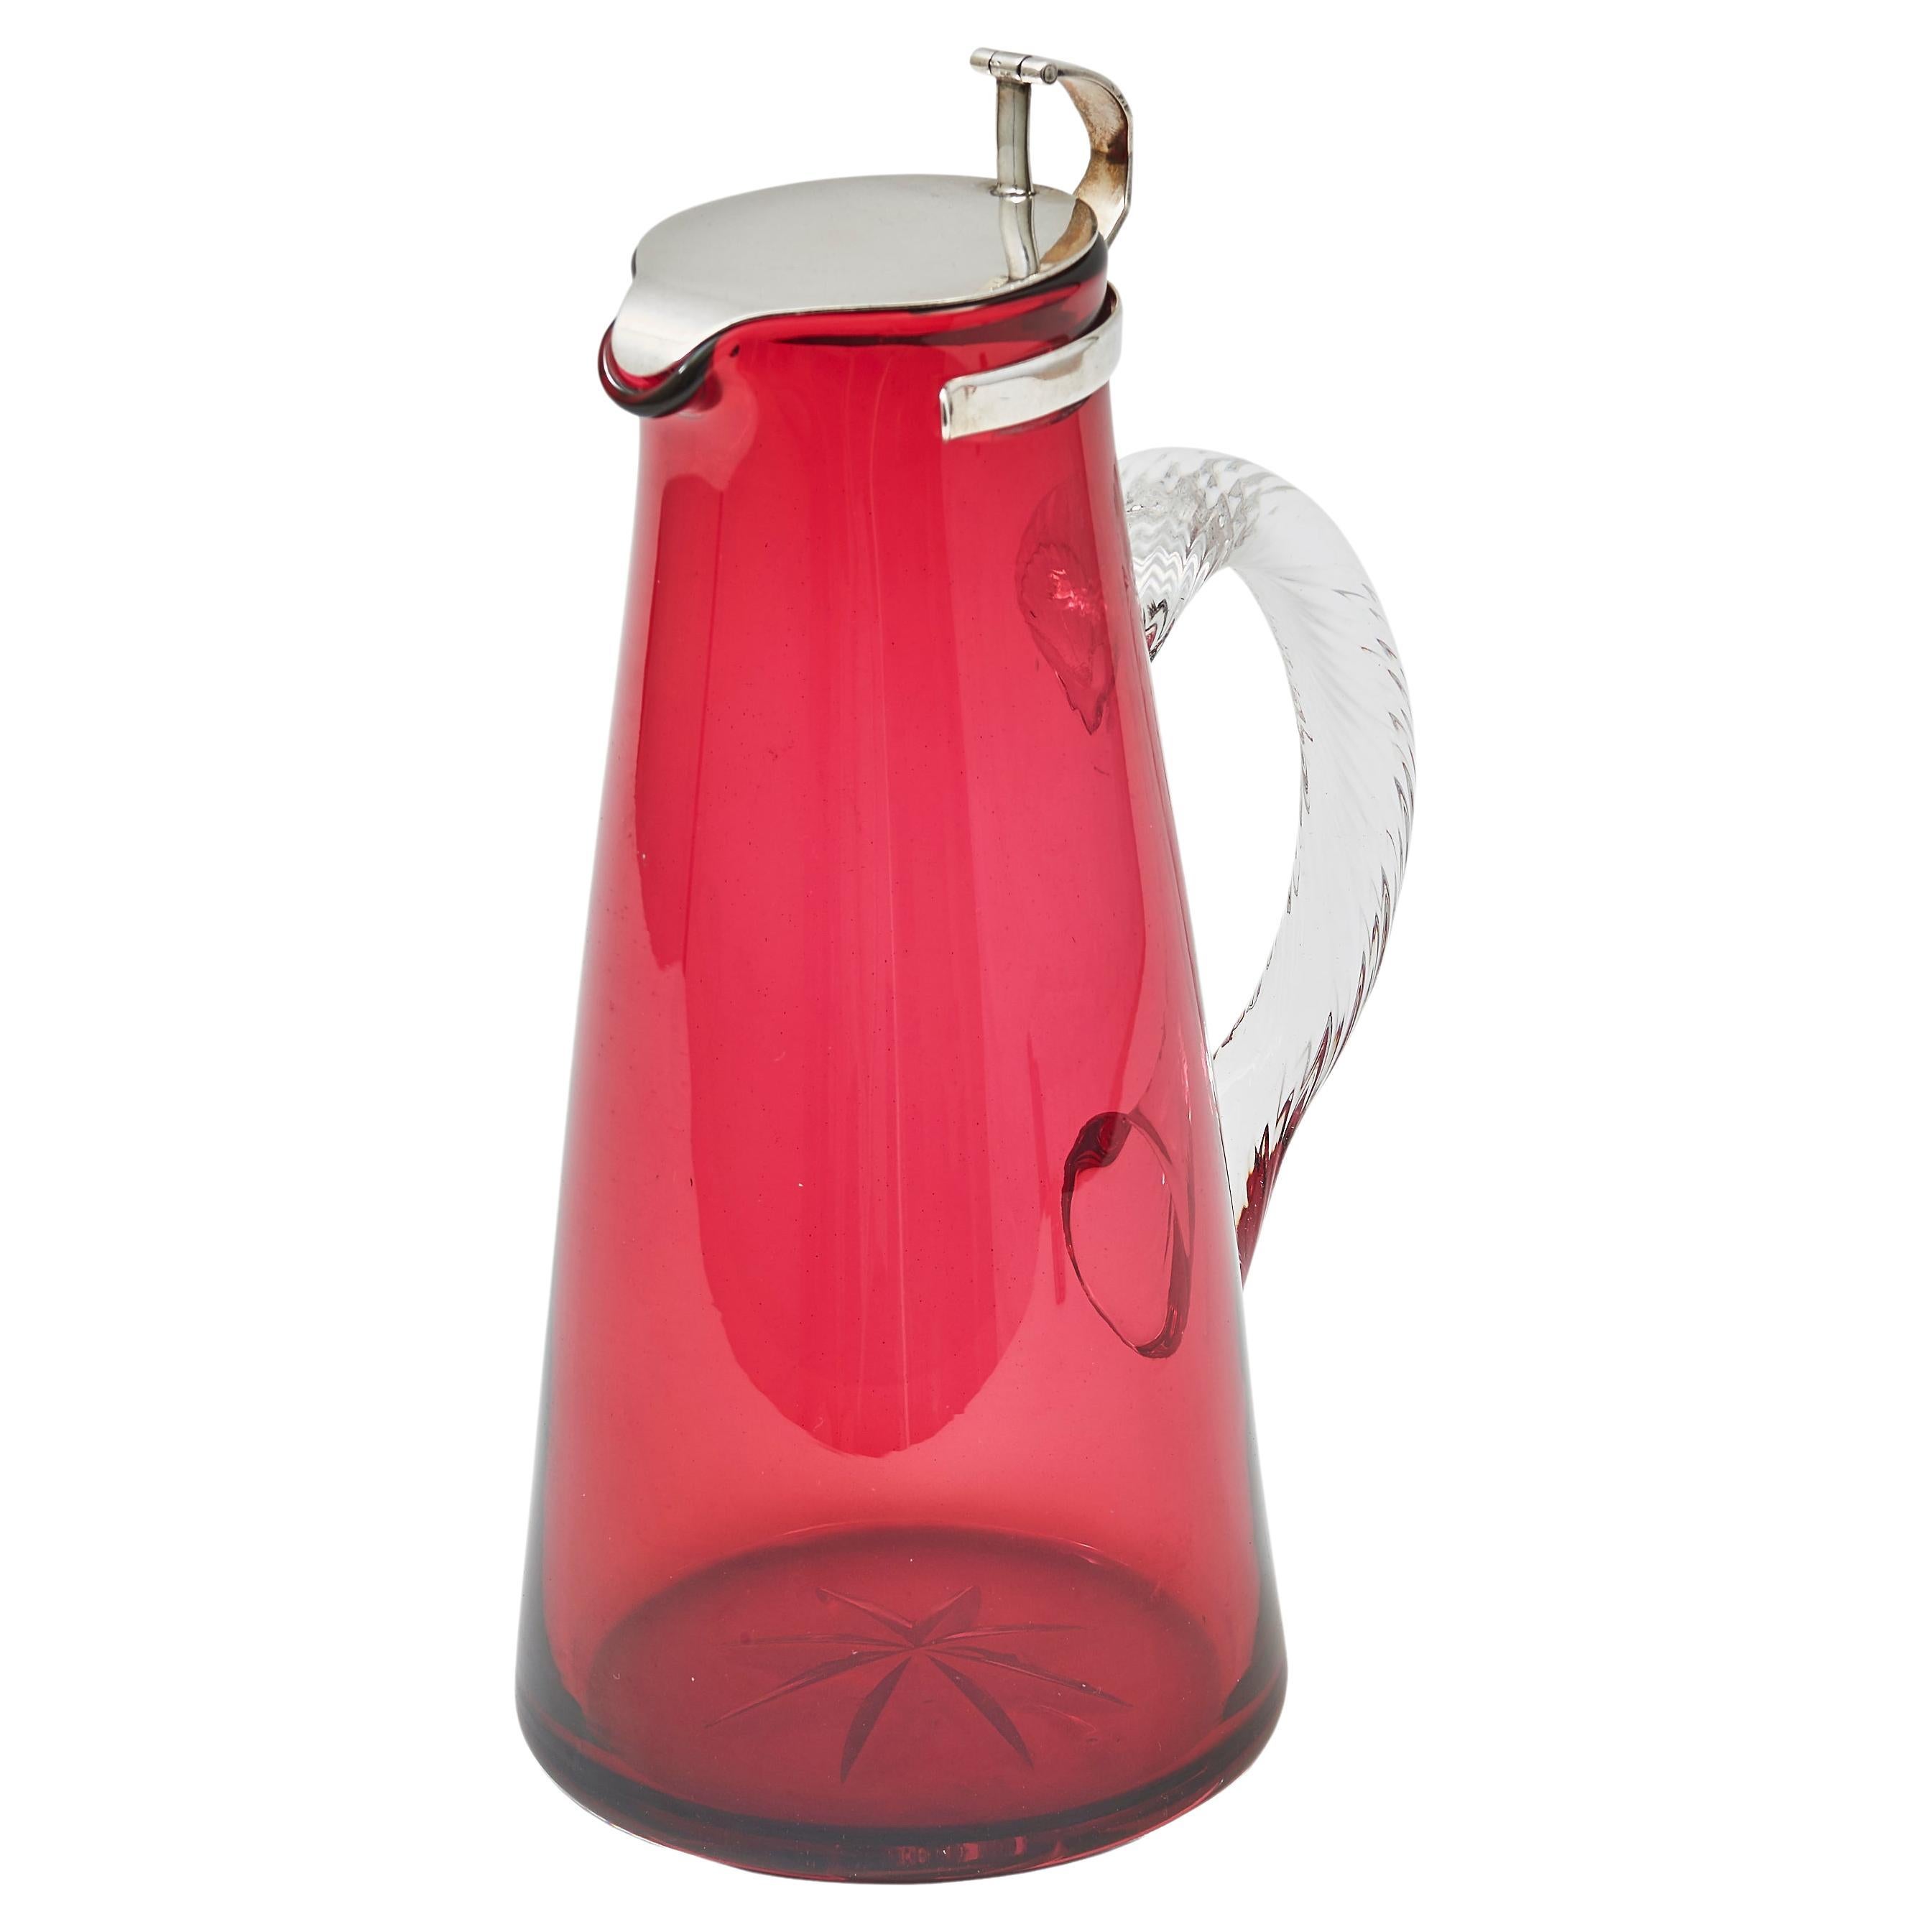 Cranberry Glass Jug by Heath & Middleton, 1907 For Sale